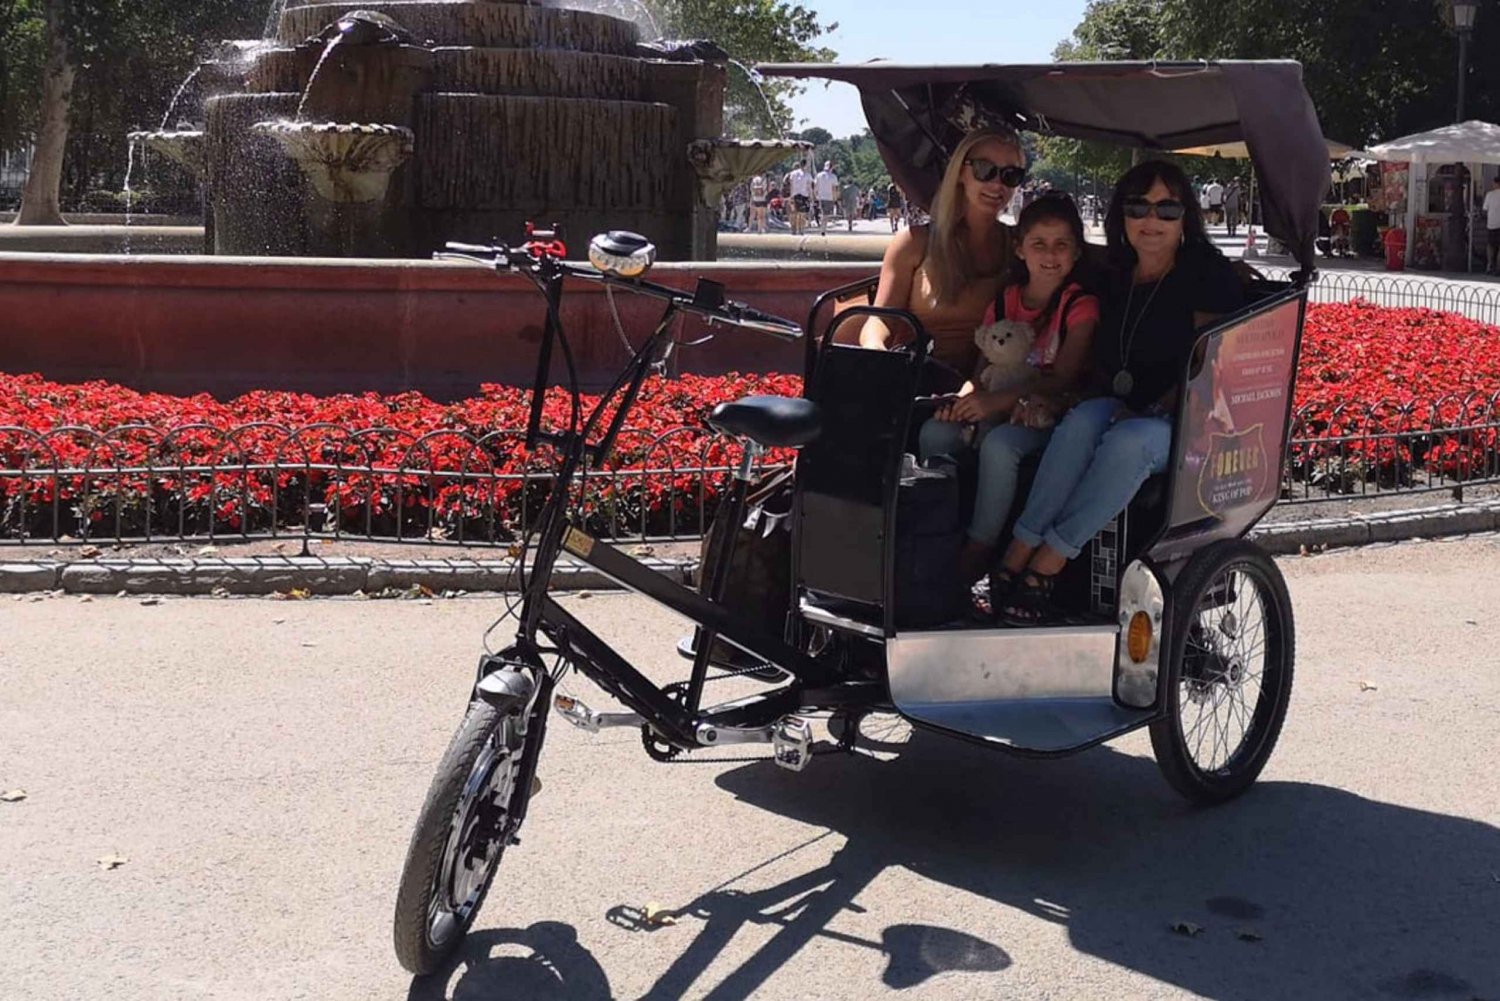 Madrid: Discover the City on a 2-Hour Private Pedicab Tour